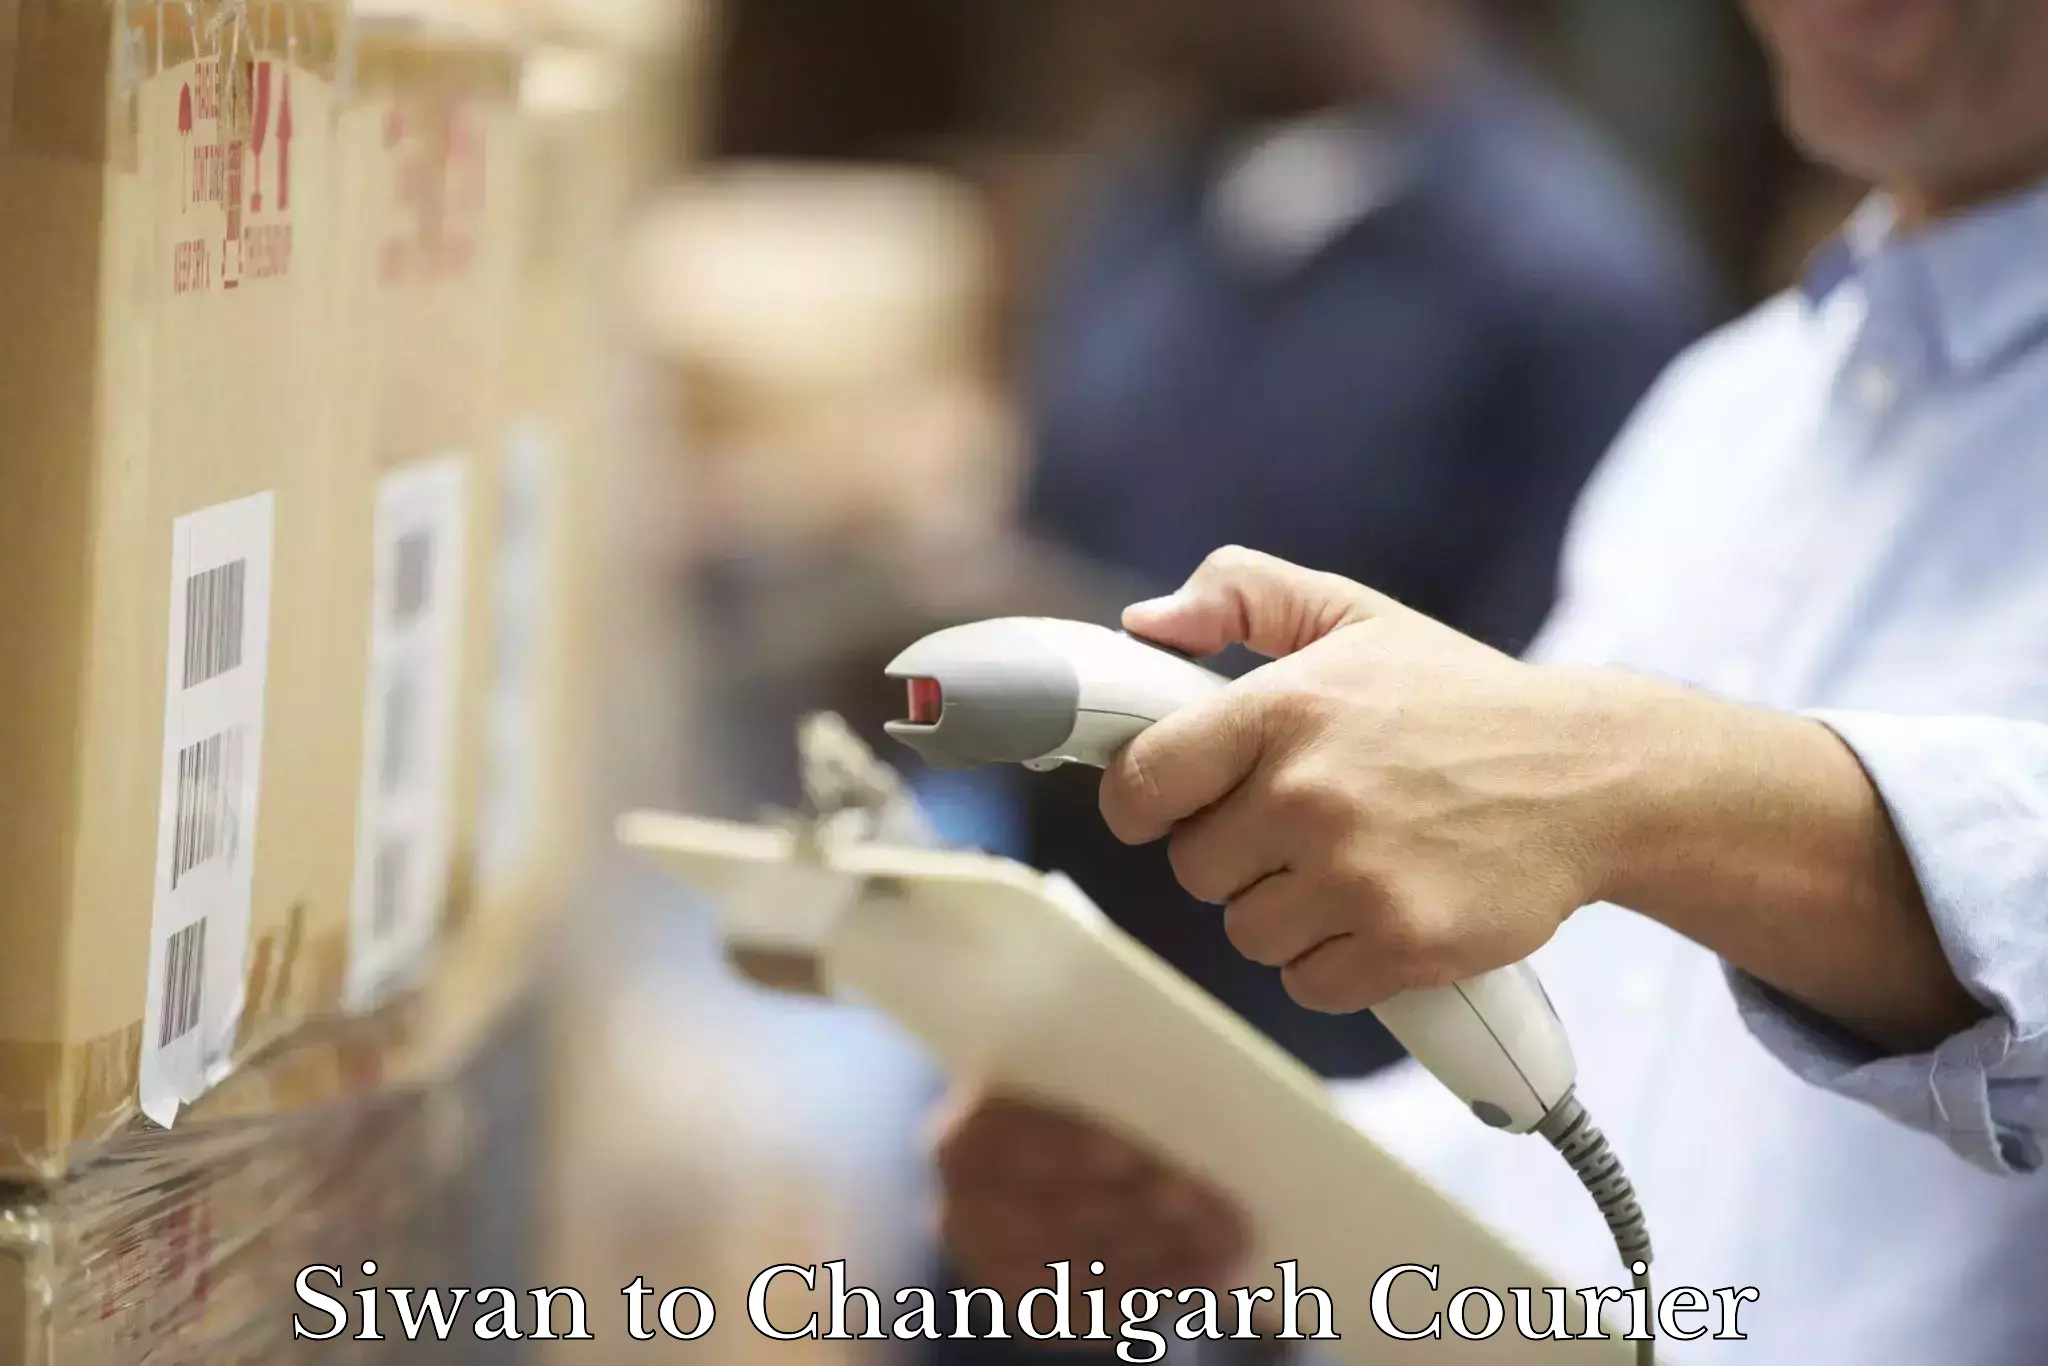 Cash on delivery service Siwan to Chandigarh